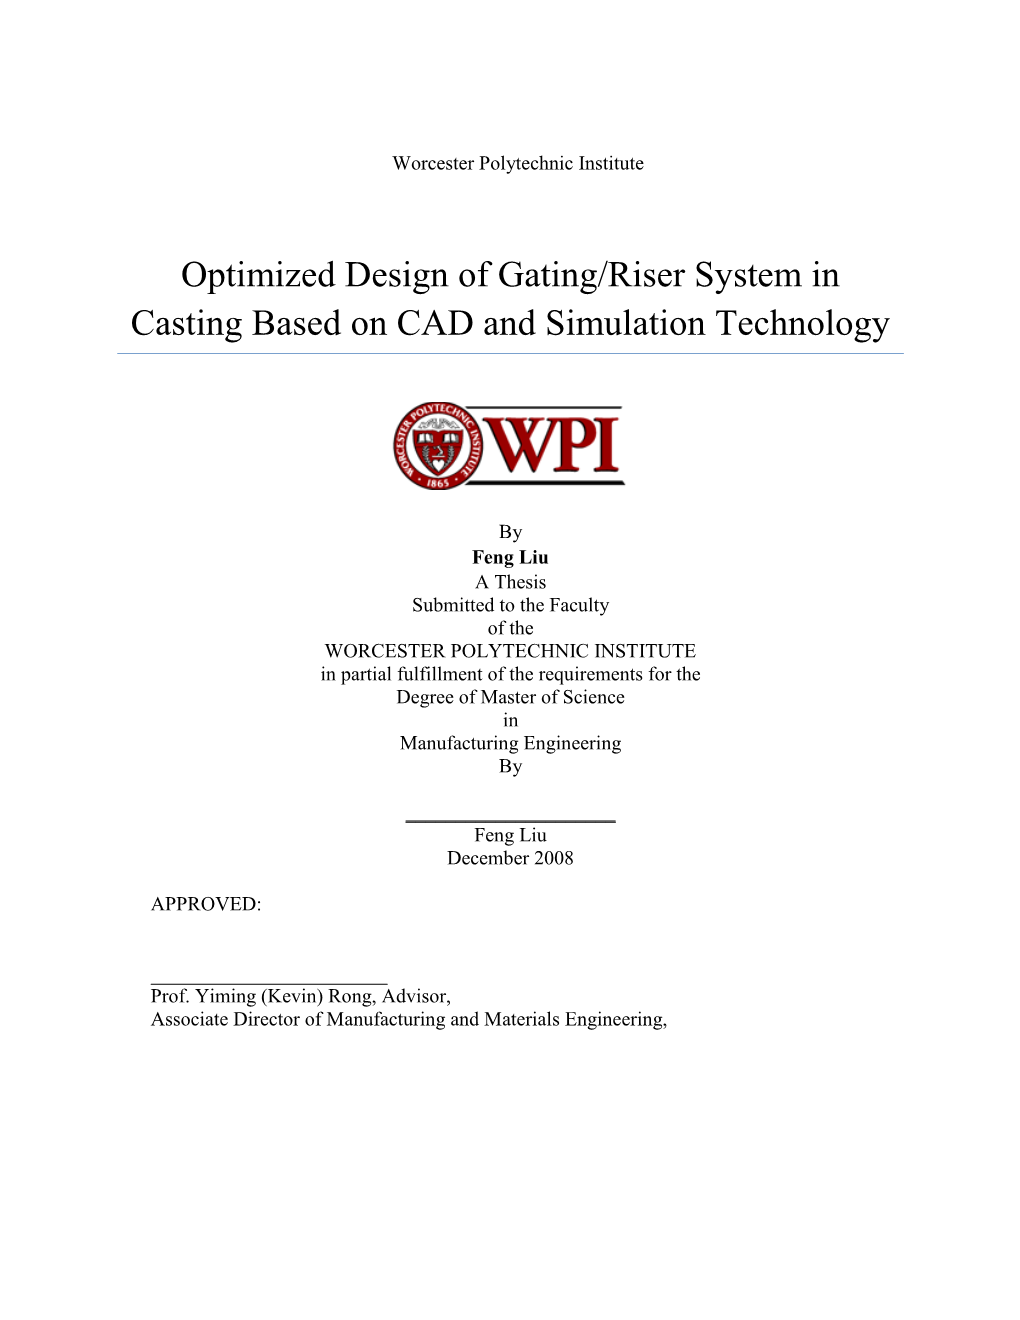 Optimized Design of Gating/Riser System in Casting Based on CAD and Simulation Technology